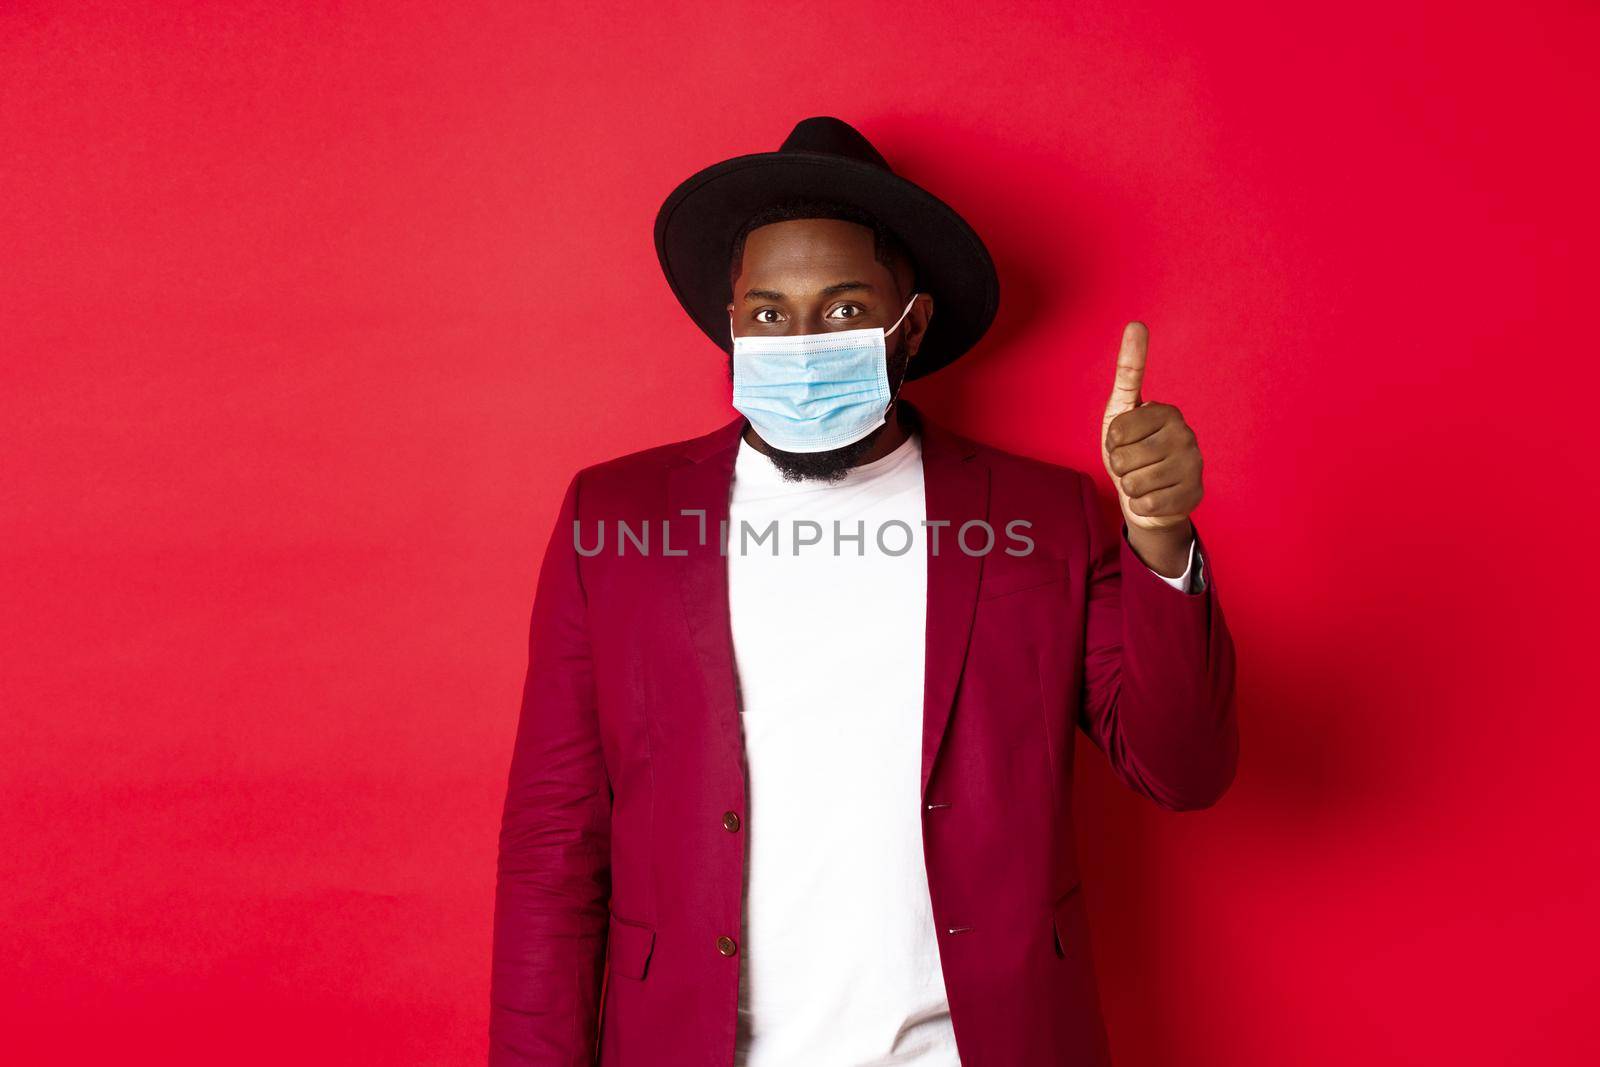 Covid-19 and fashion concept. Stylish african american man in hat and blazer, wearing face mask and showing thumb up, standing over red background.